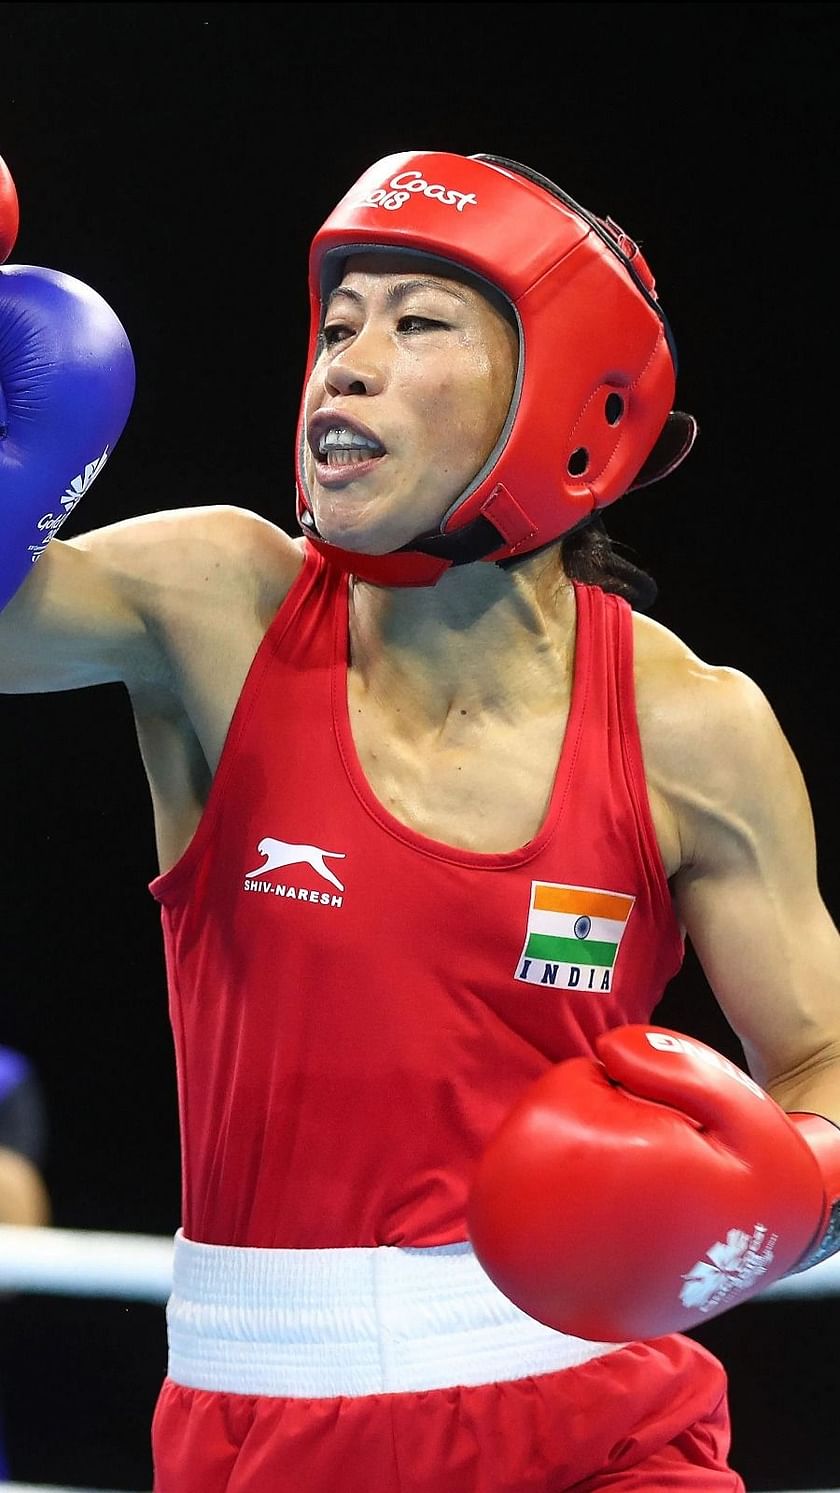 Indian boxers rankings according to their medal chances at the